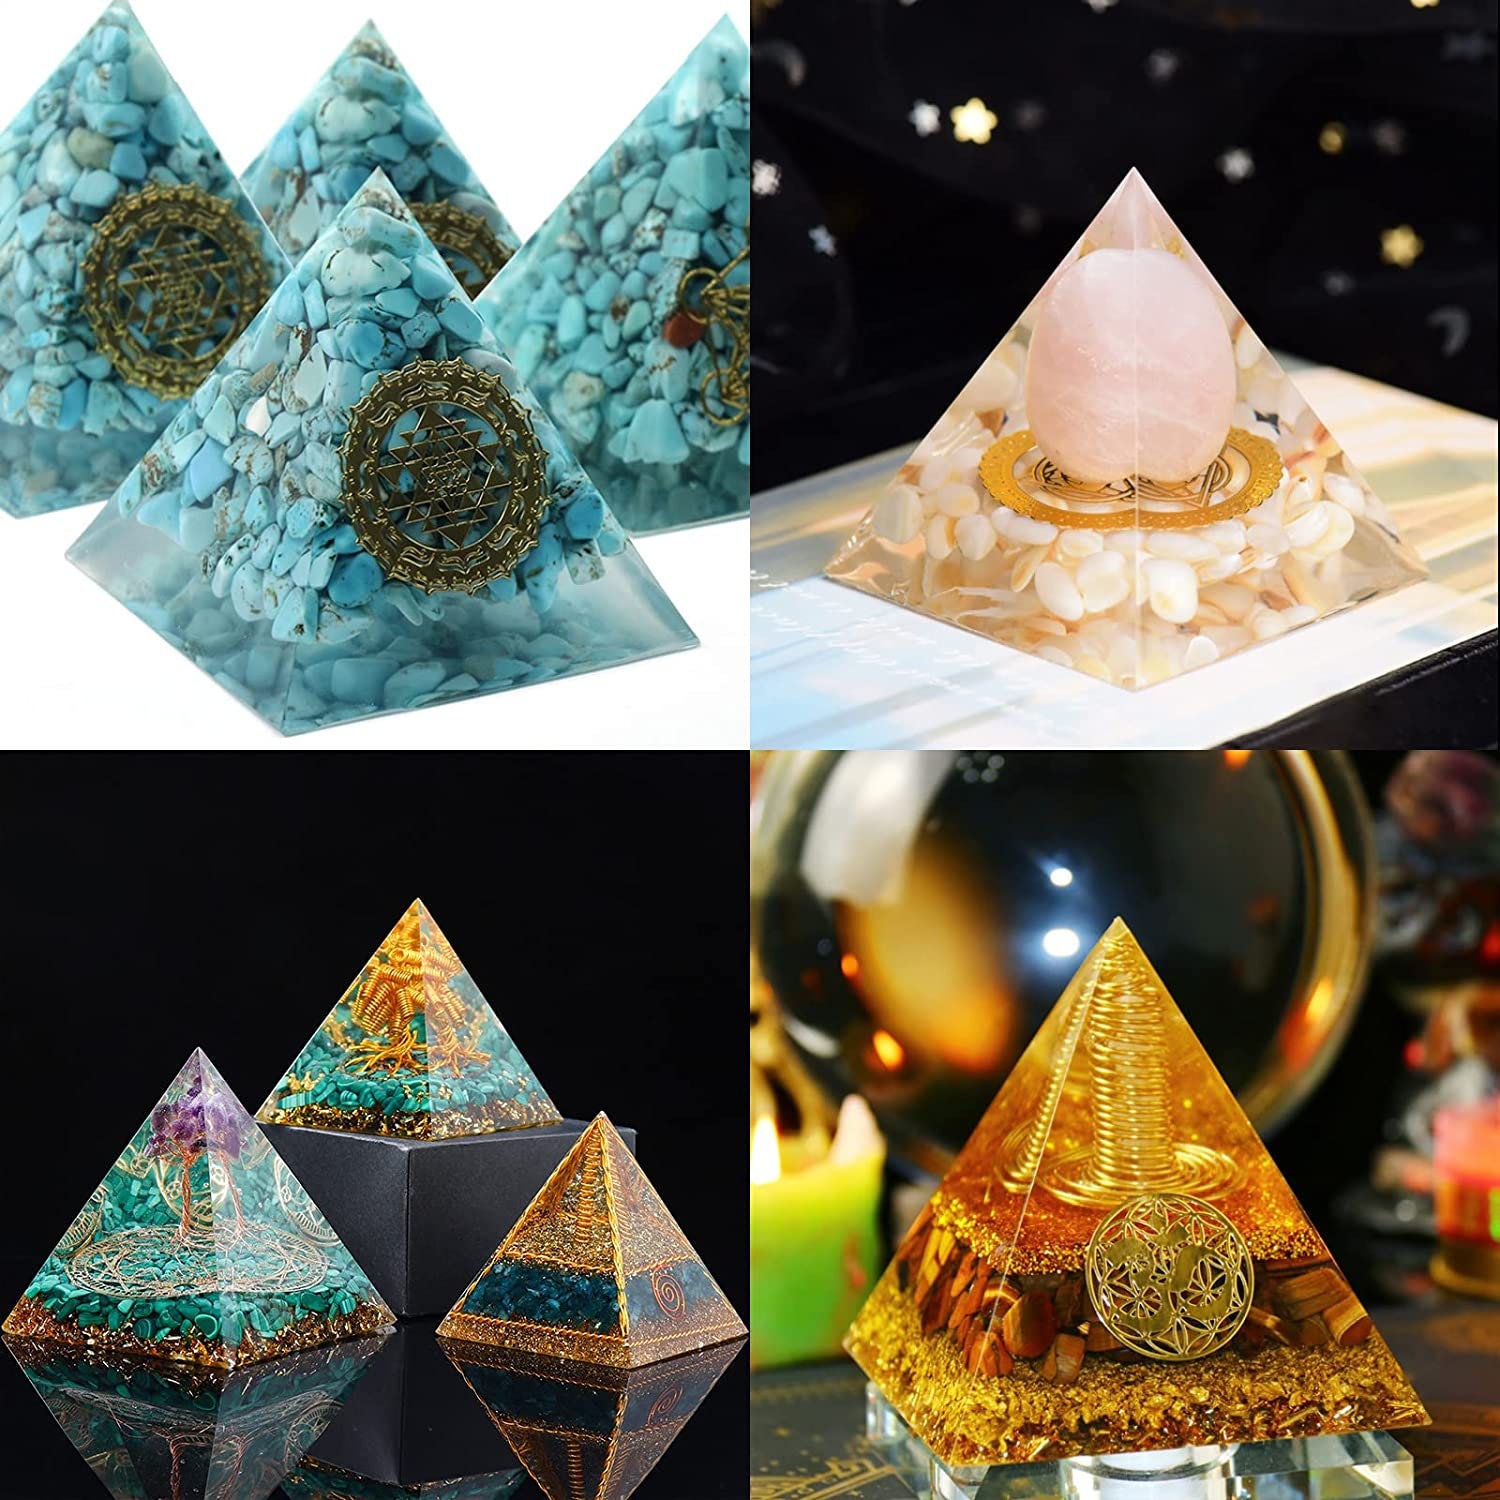 3 PCS Clear Pyramid Molds for Resin, 3Pcs 4.7''6''7.5'' Inner